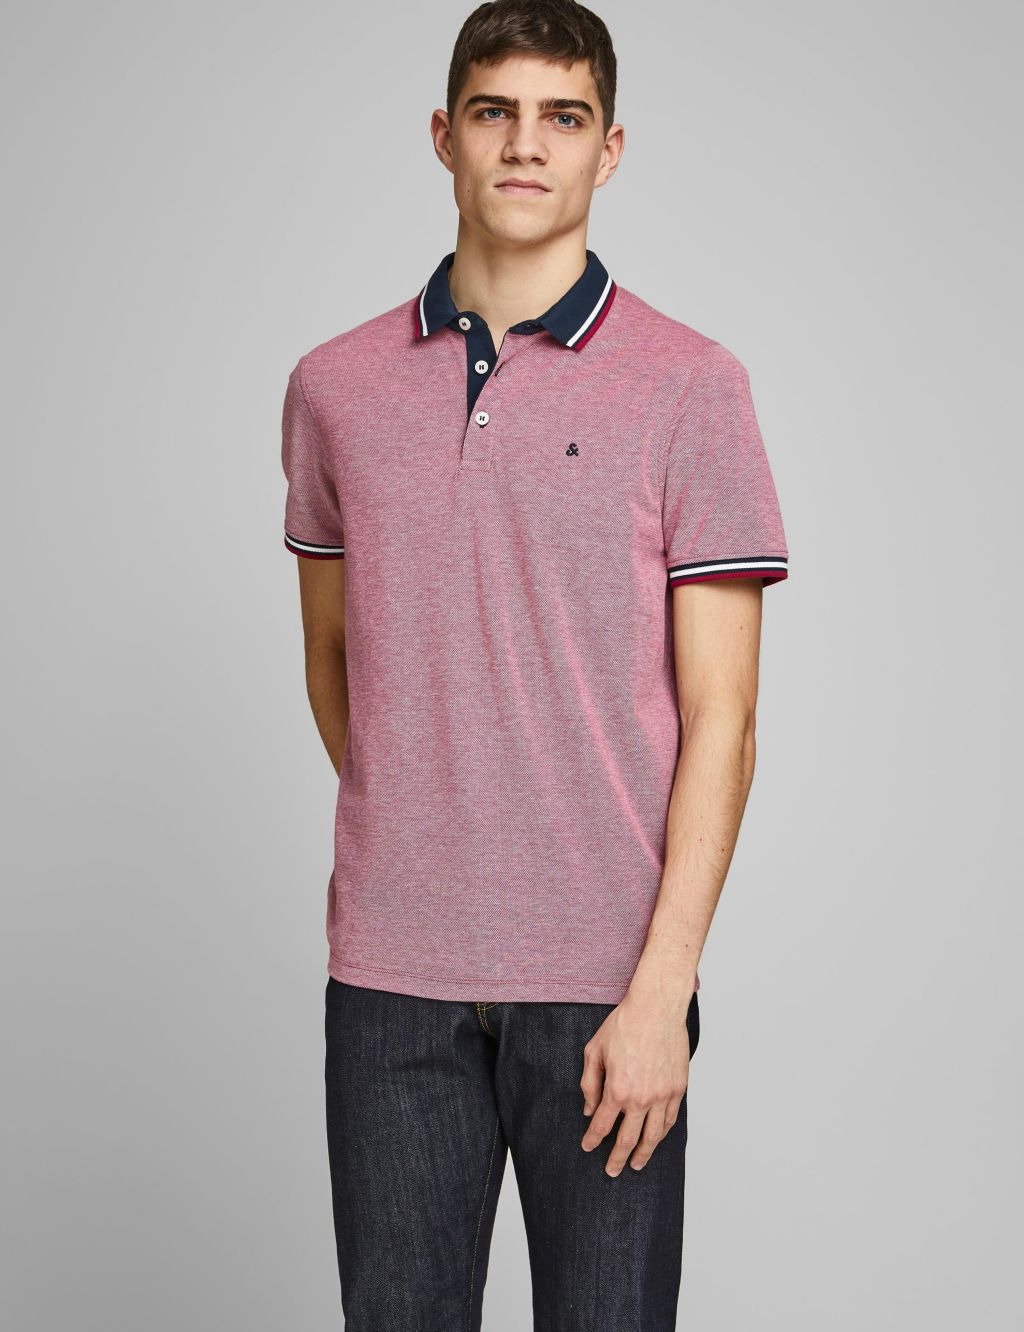 Slim Fit Pure Cotton Tipped Polo Shirt image 1